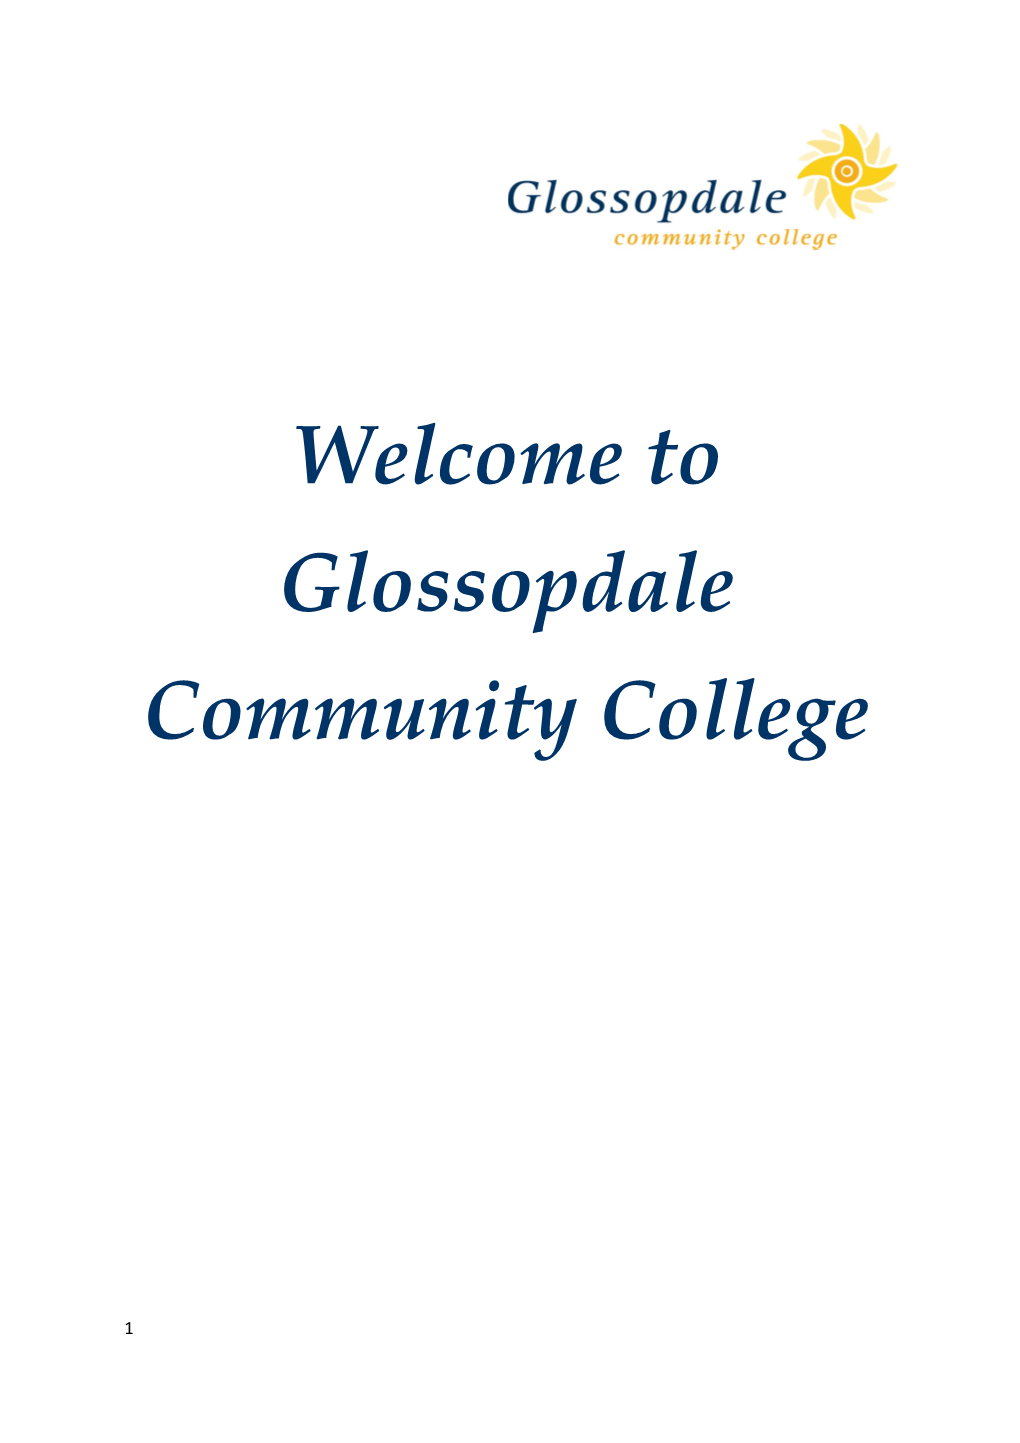 Welcome to Glossopdale Community College